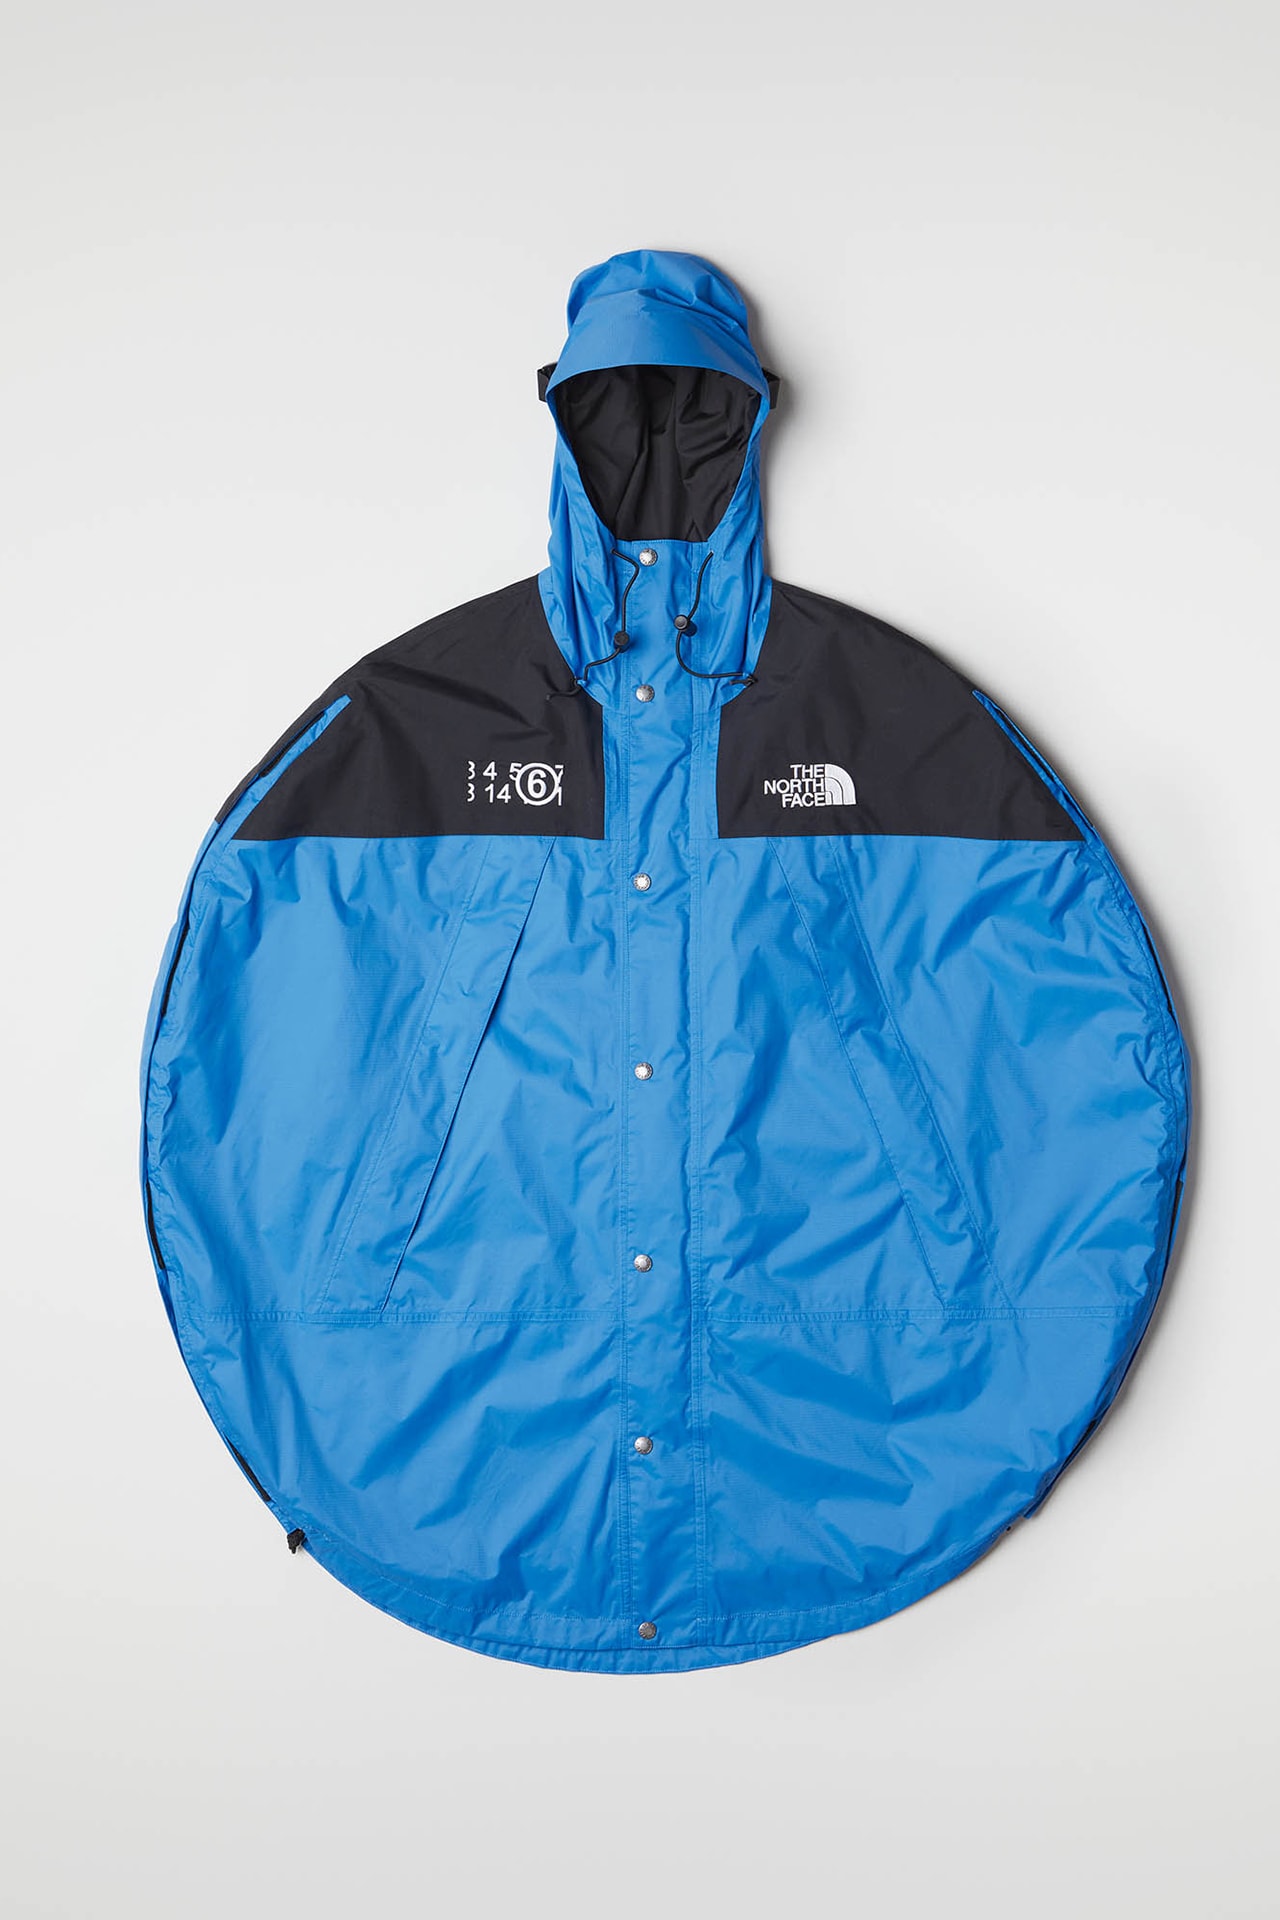 MM6 Maison Margiela The North Face Collaboration Fall Winter 2020 Circle Mountain Jacket Cobalt Blue